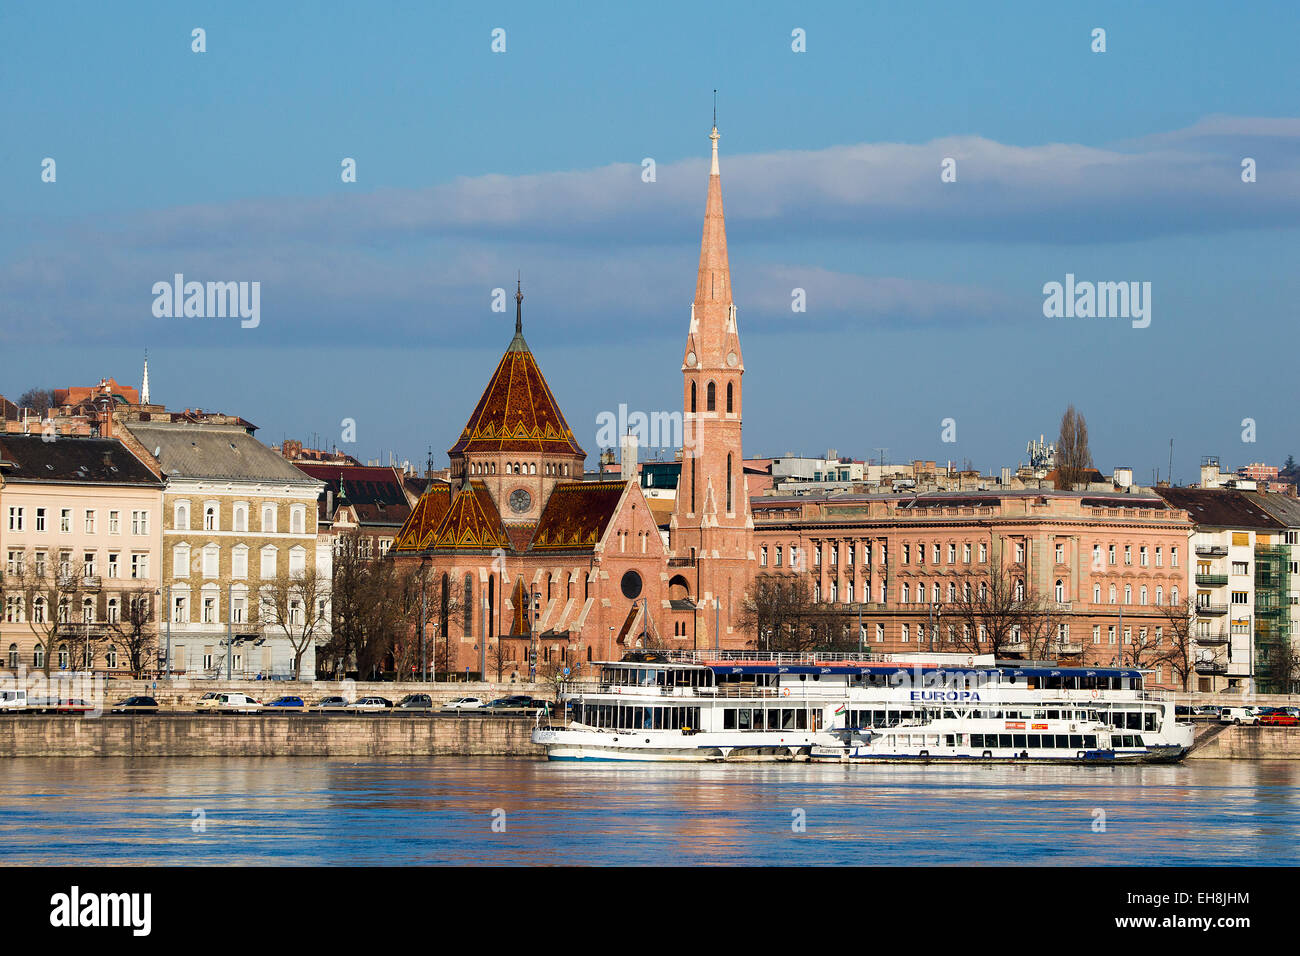 Calvinist church with a Danube river cruise boat in the foreground, Budapest, Hungary Stock Photo